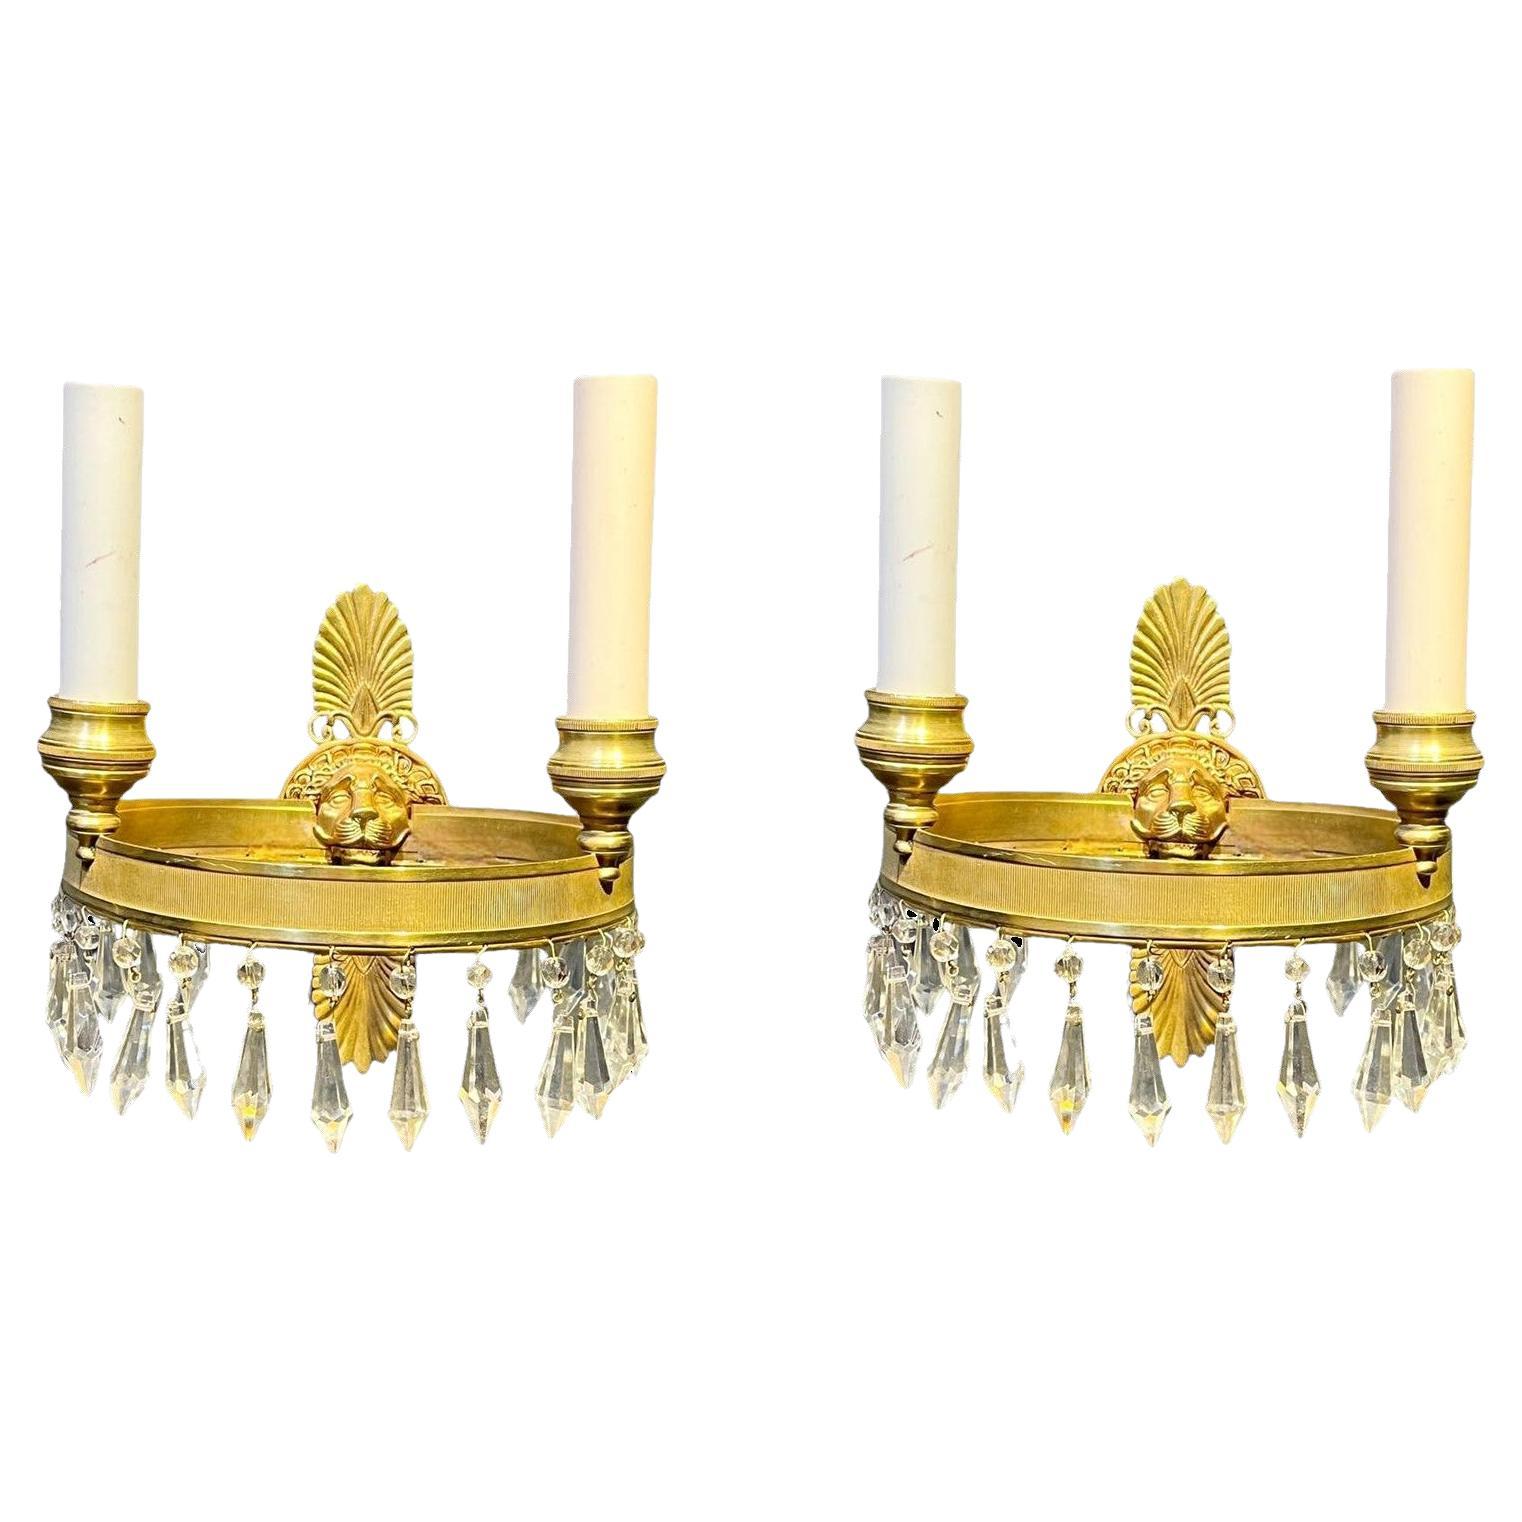 1930's French Empire Sconces with Lion's Head